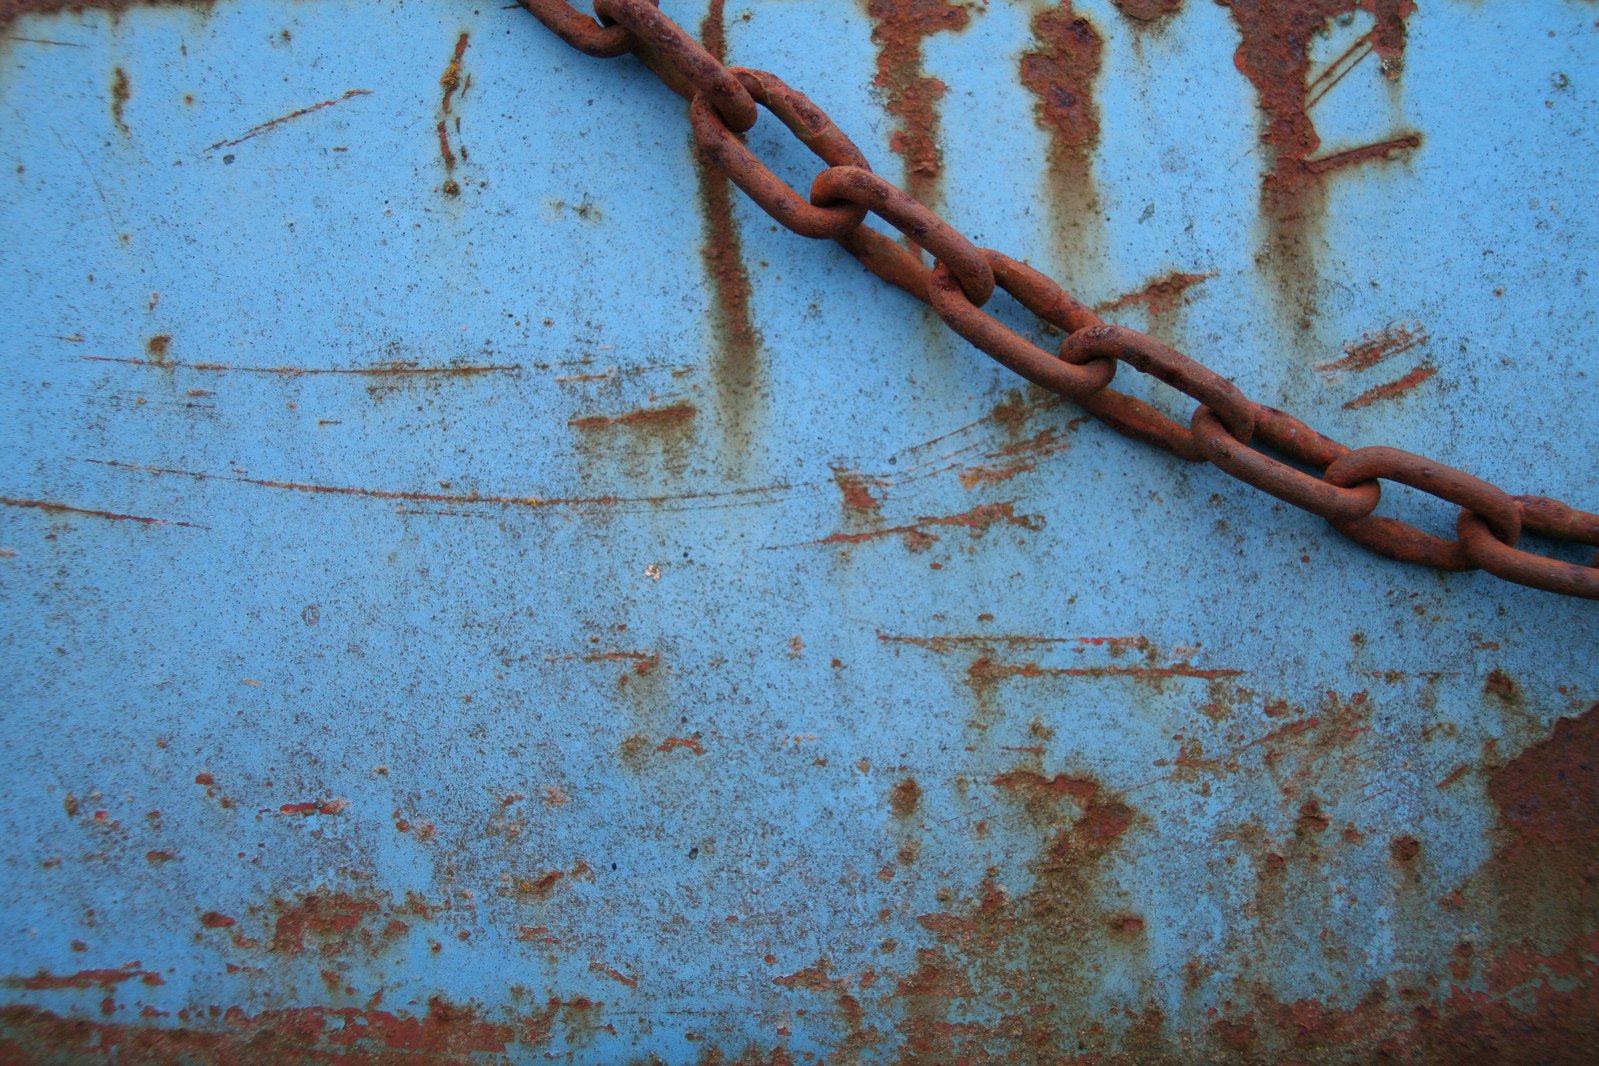 an old rusty rusty chain attached to the side of a blue truck